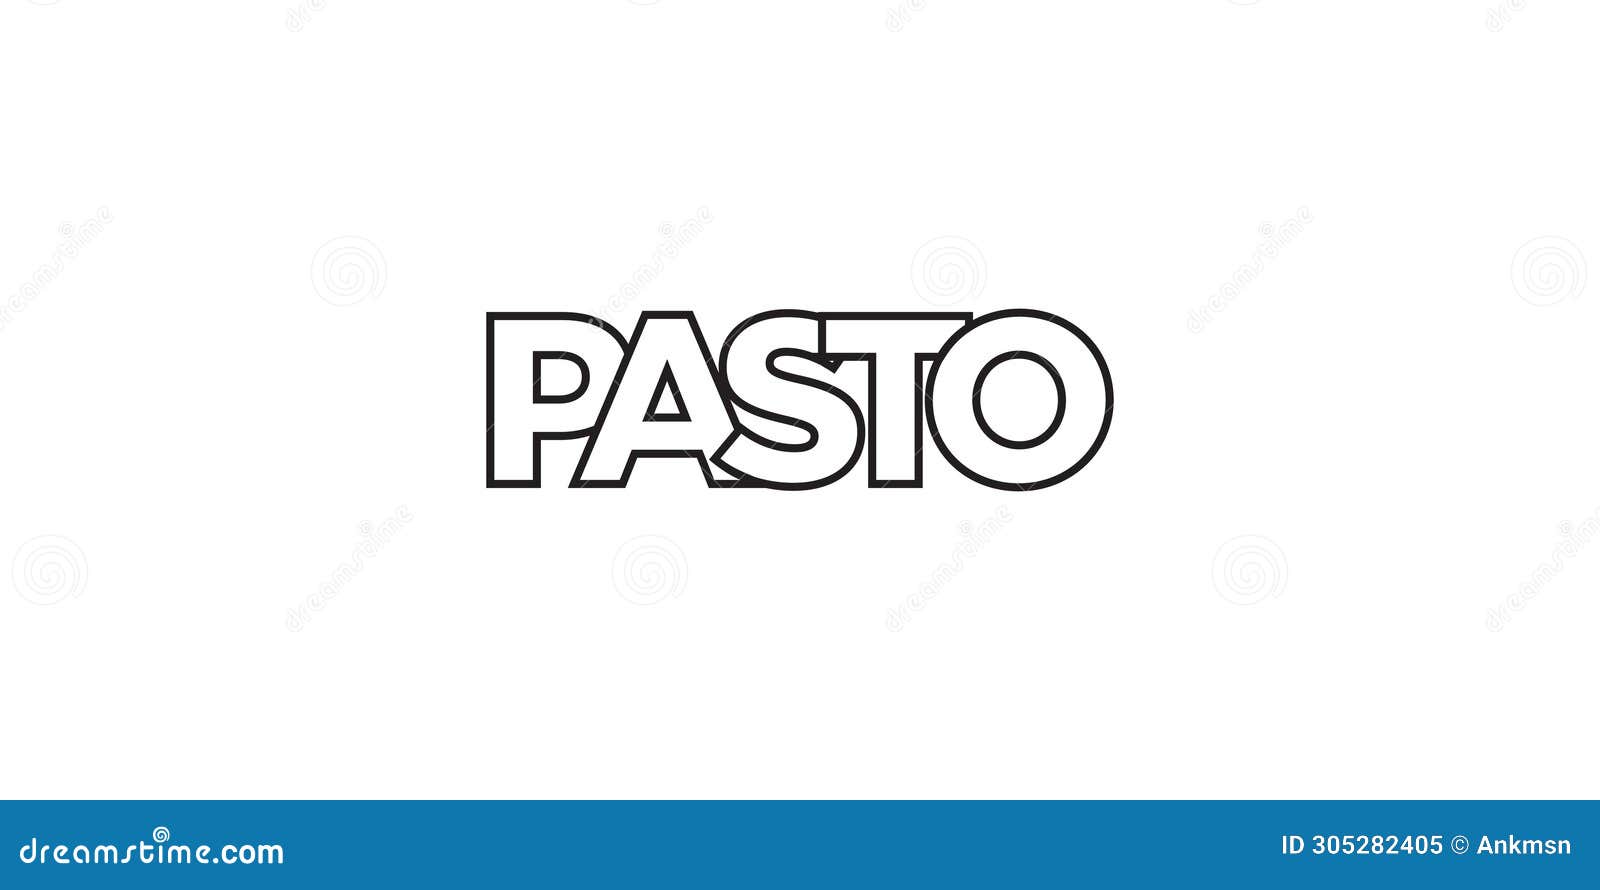 pasto in the colombia emblem. the  features a geometric style,   with bold typography in a modern font.